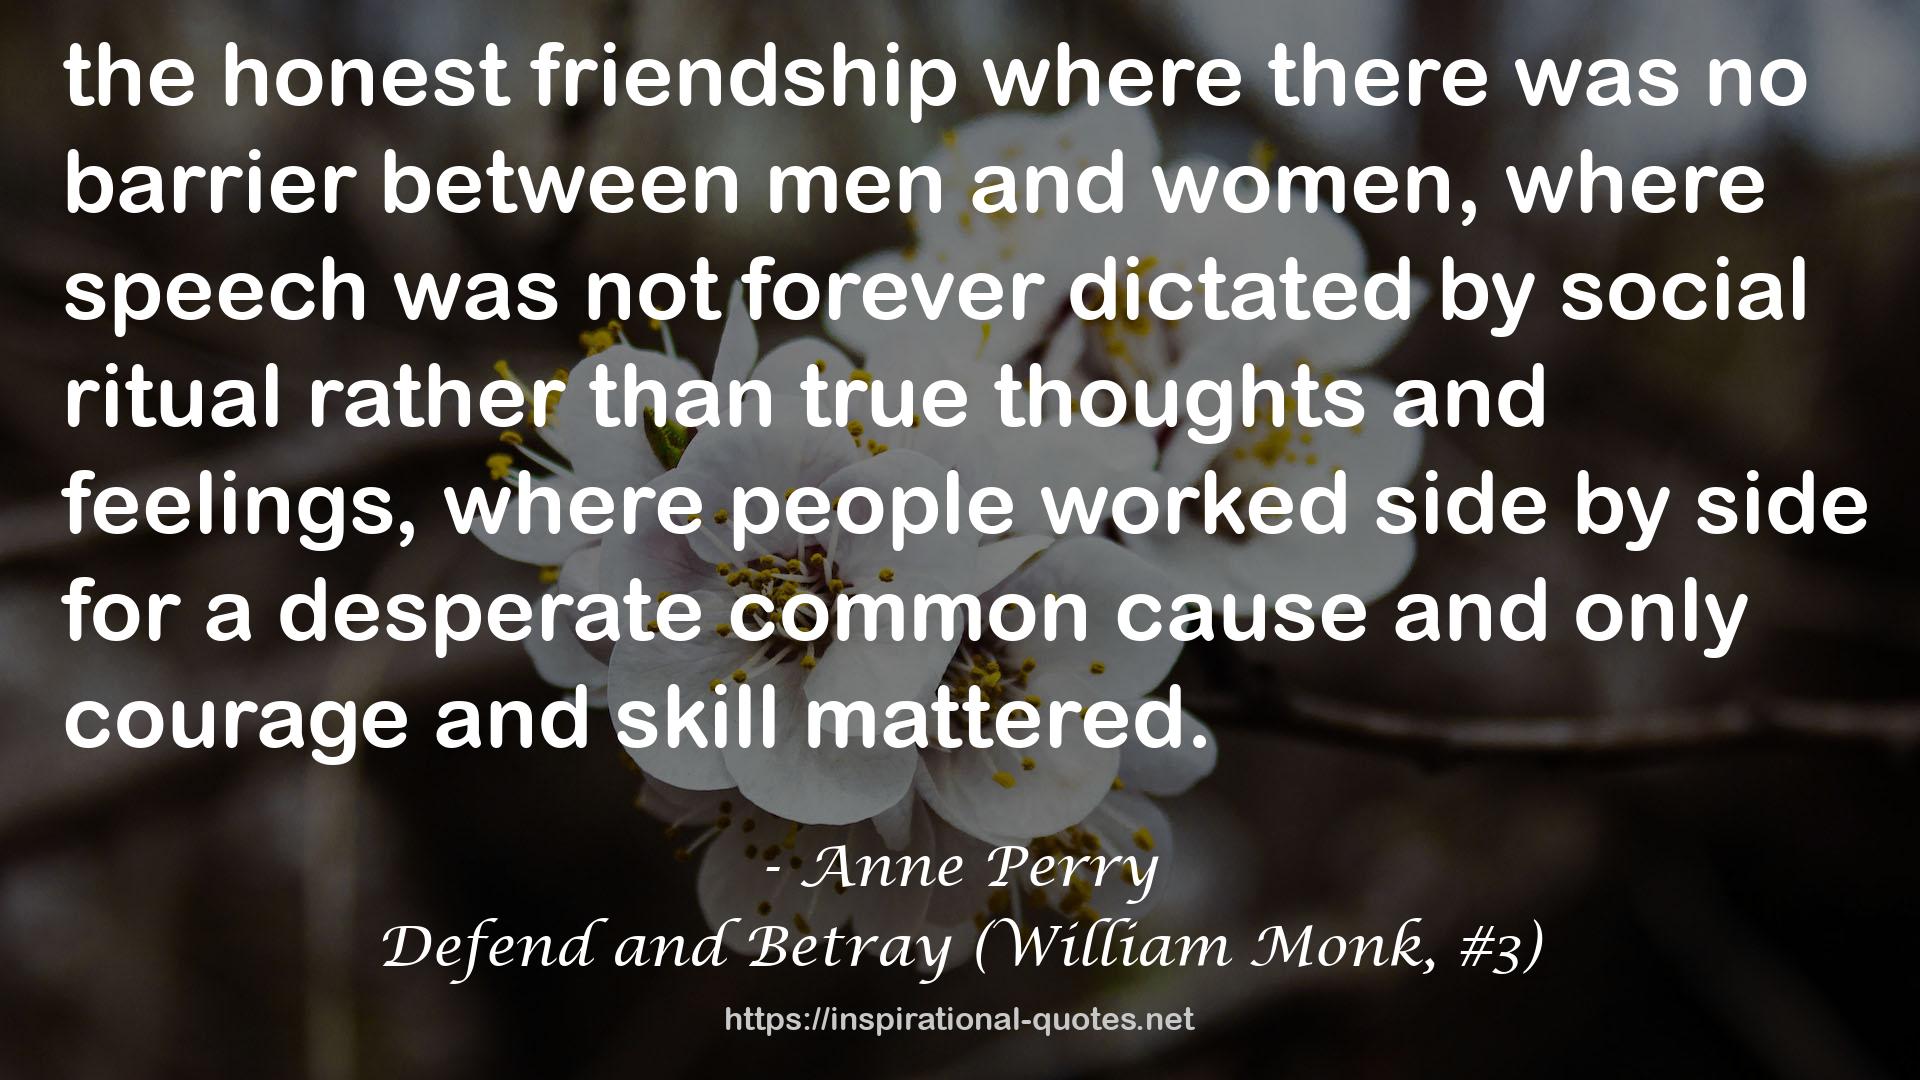 Defend and Betray (William Monk, #3) QUOTES